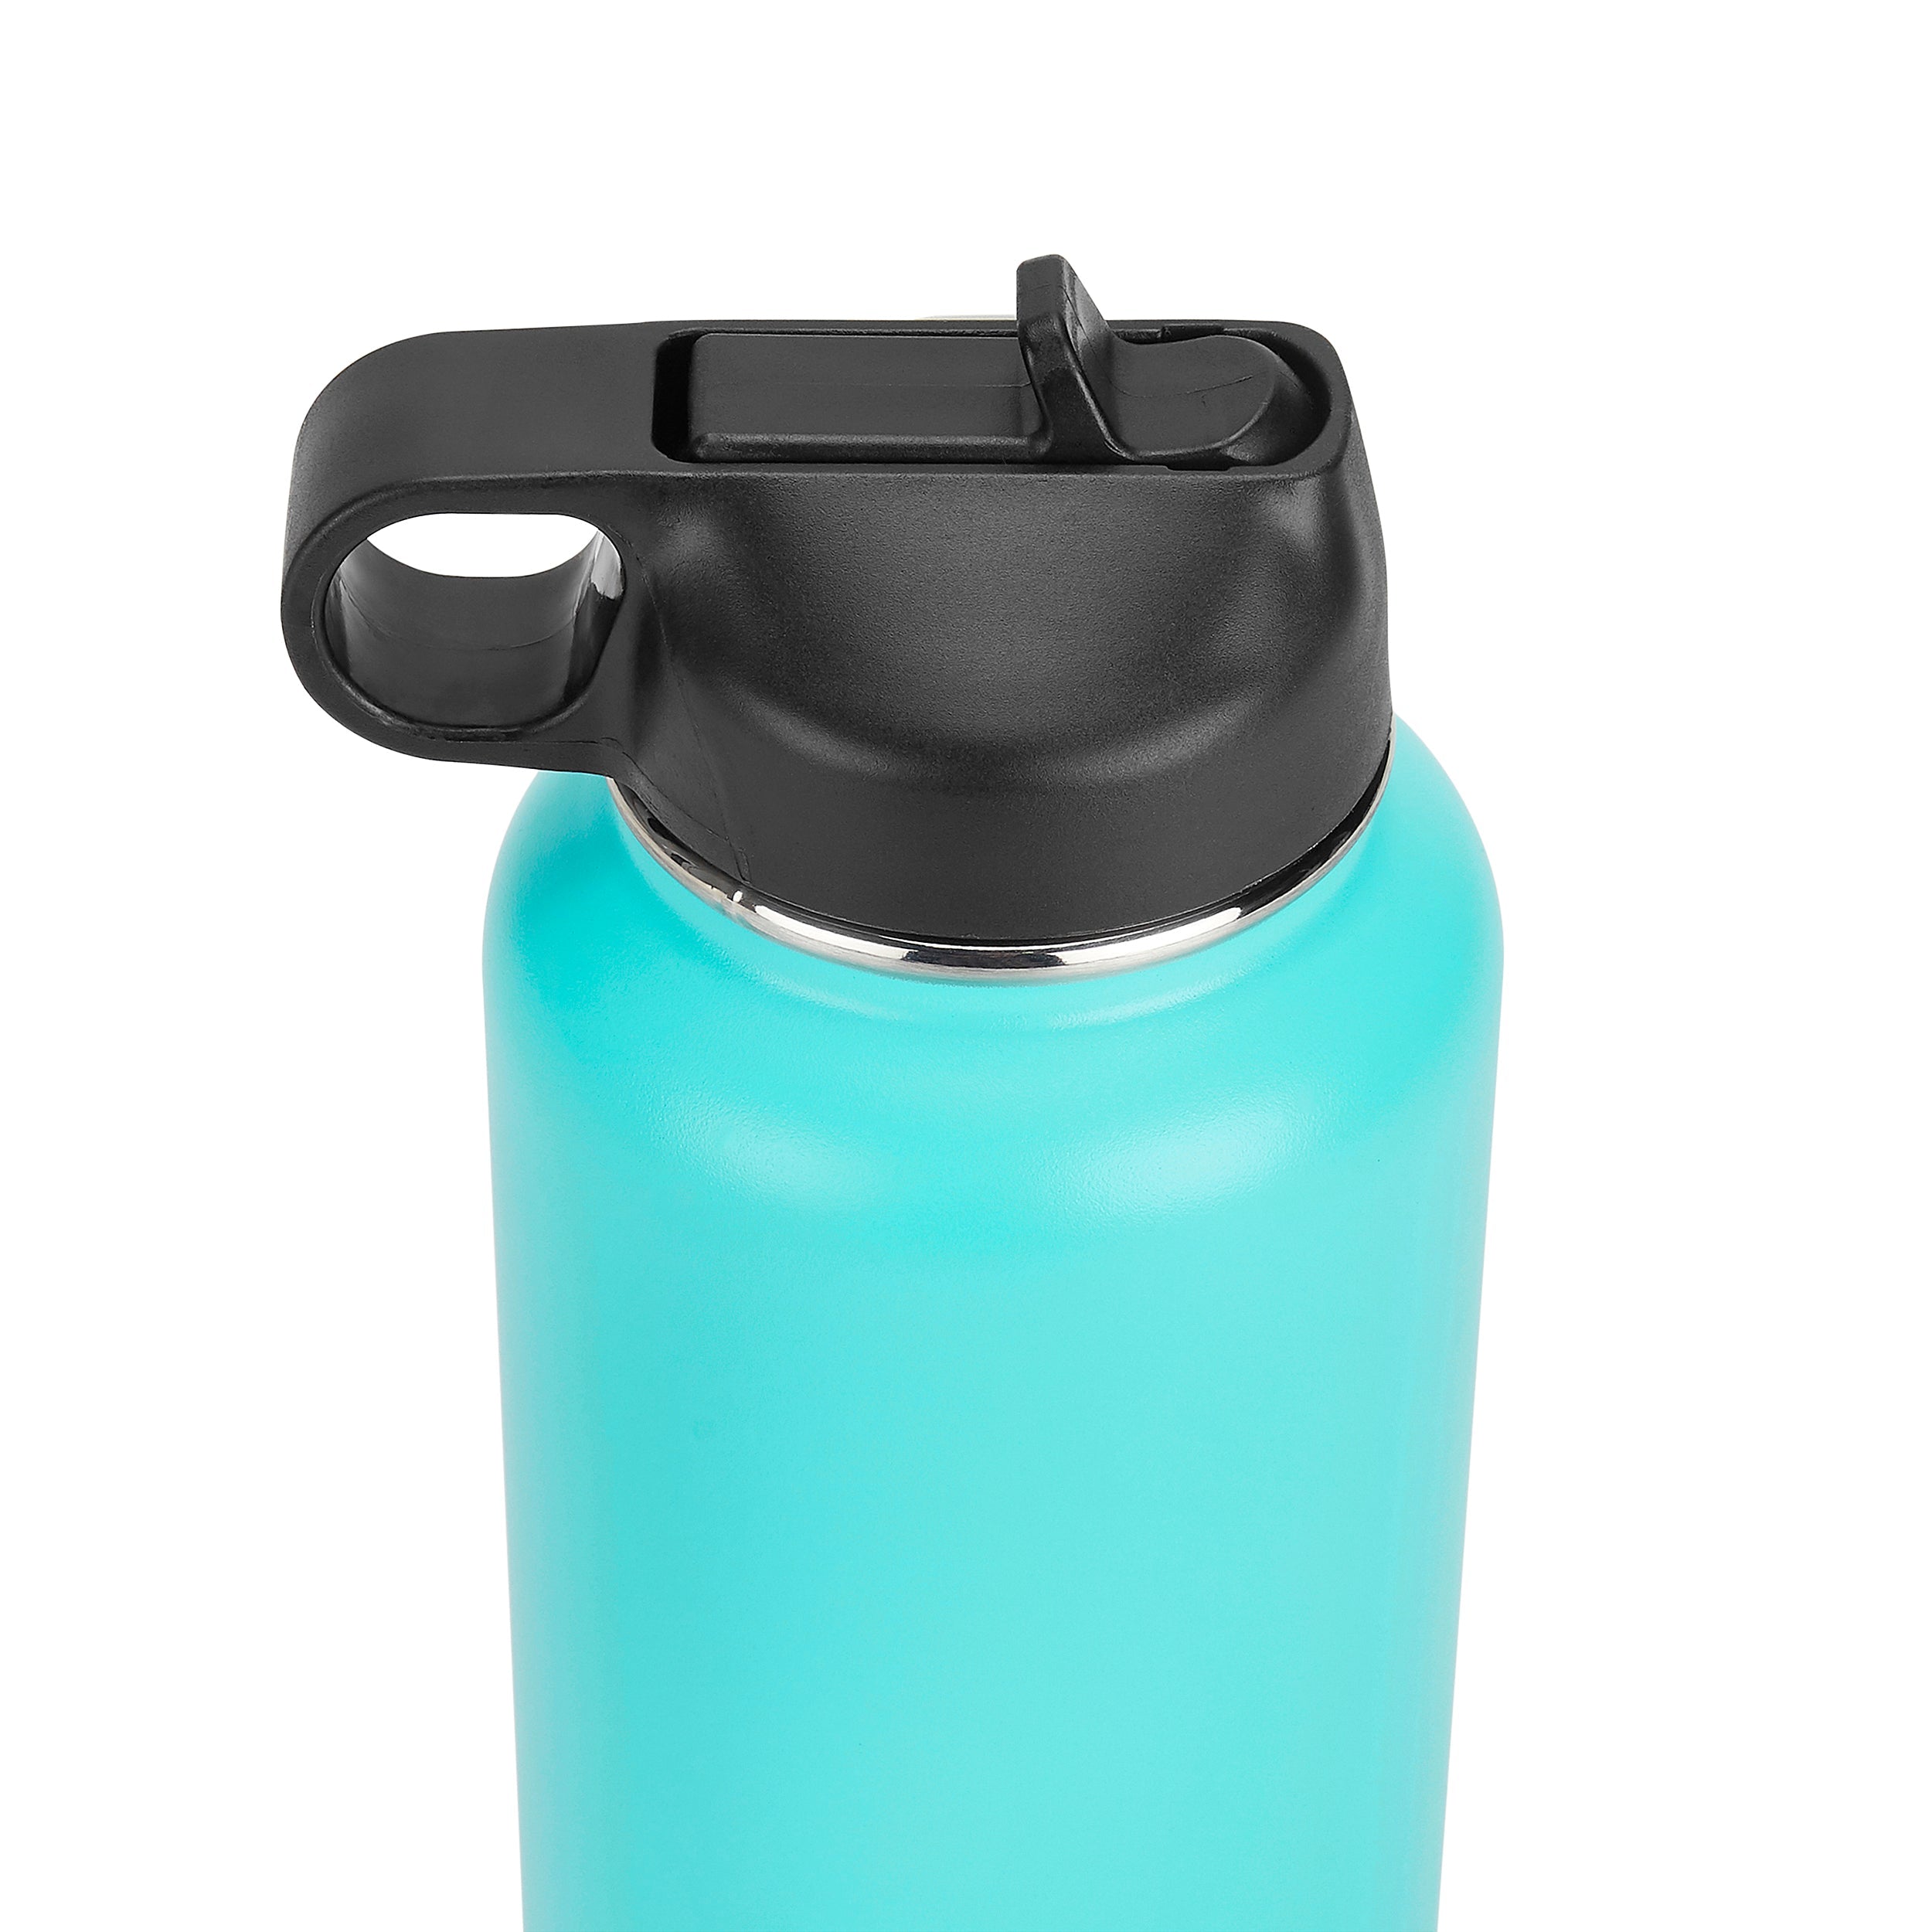 32oz Hydro Water Bottle for Pet Dog